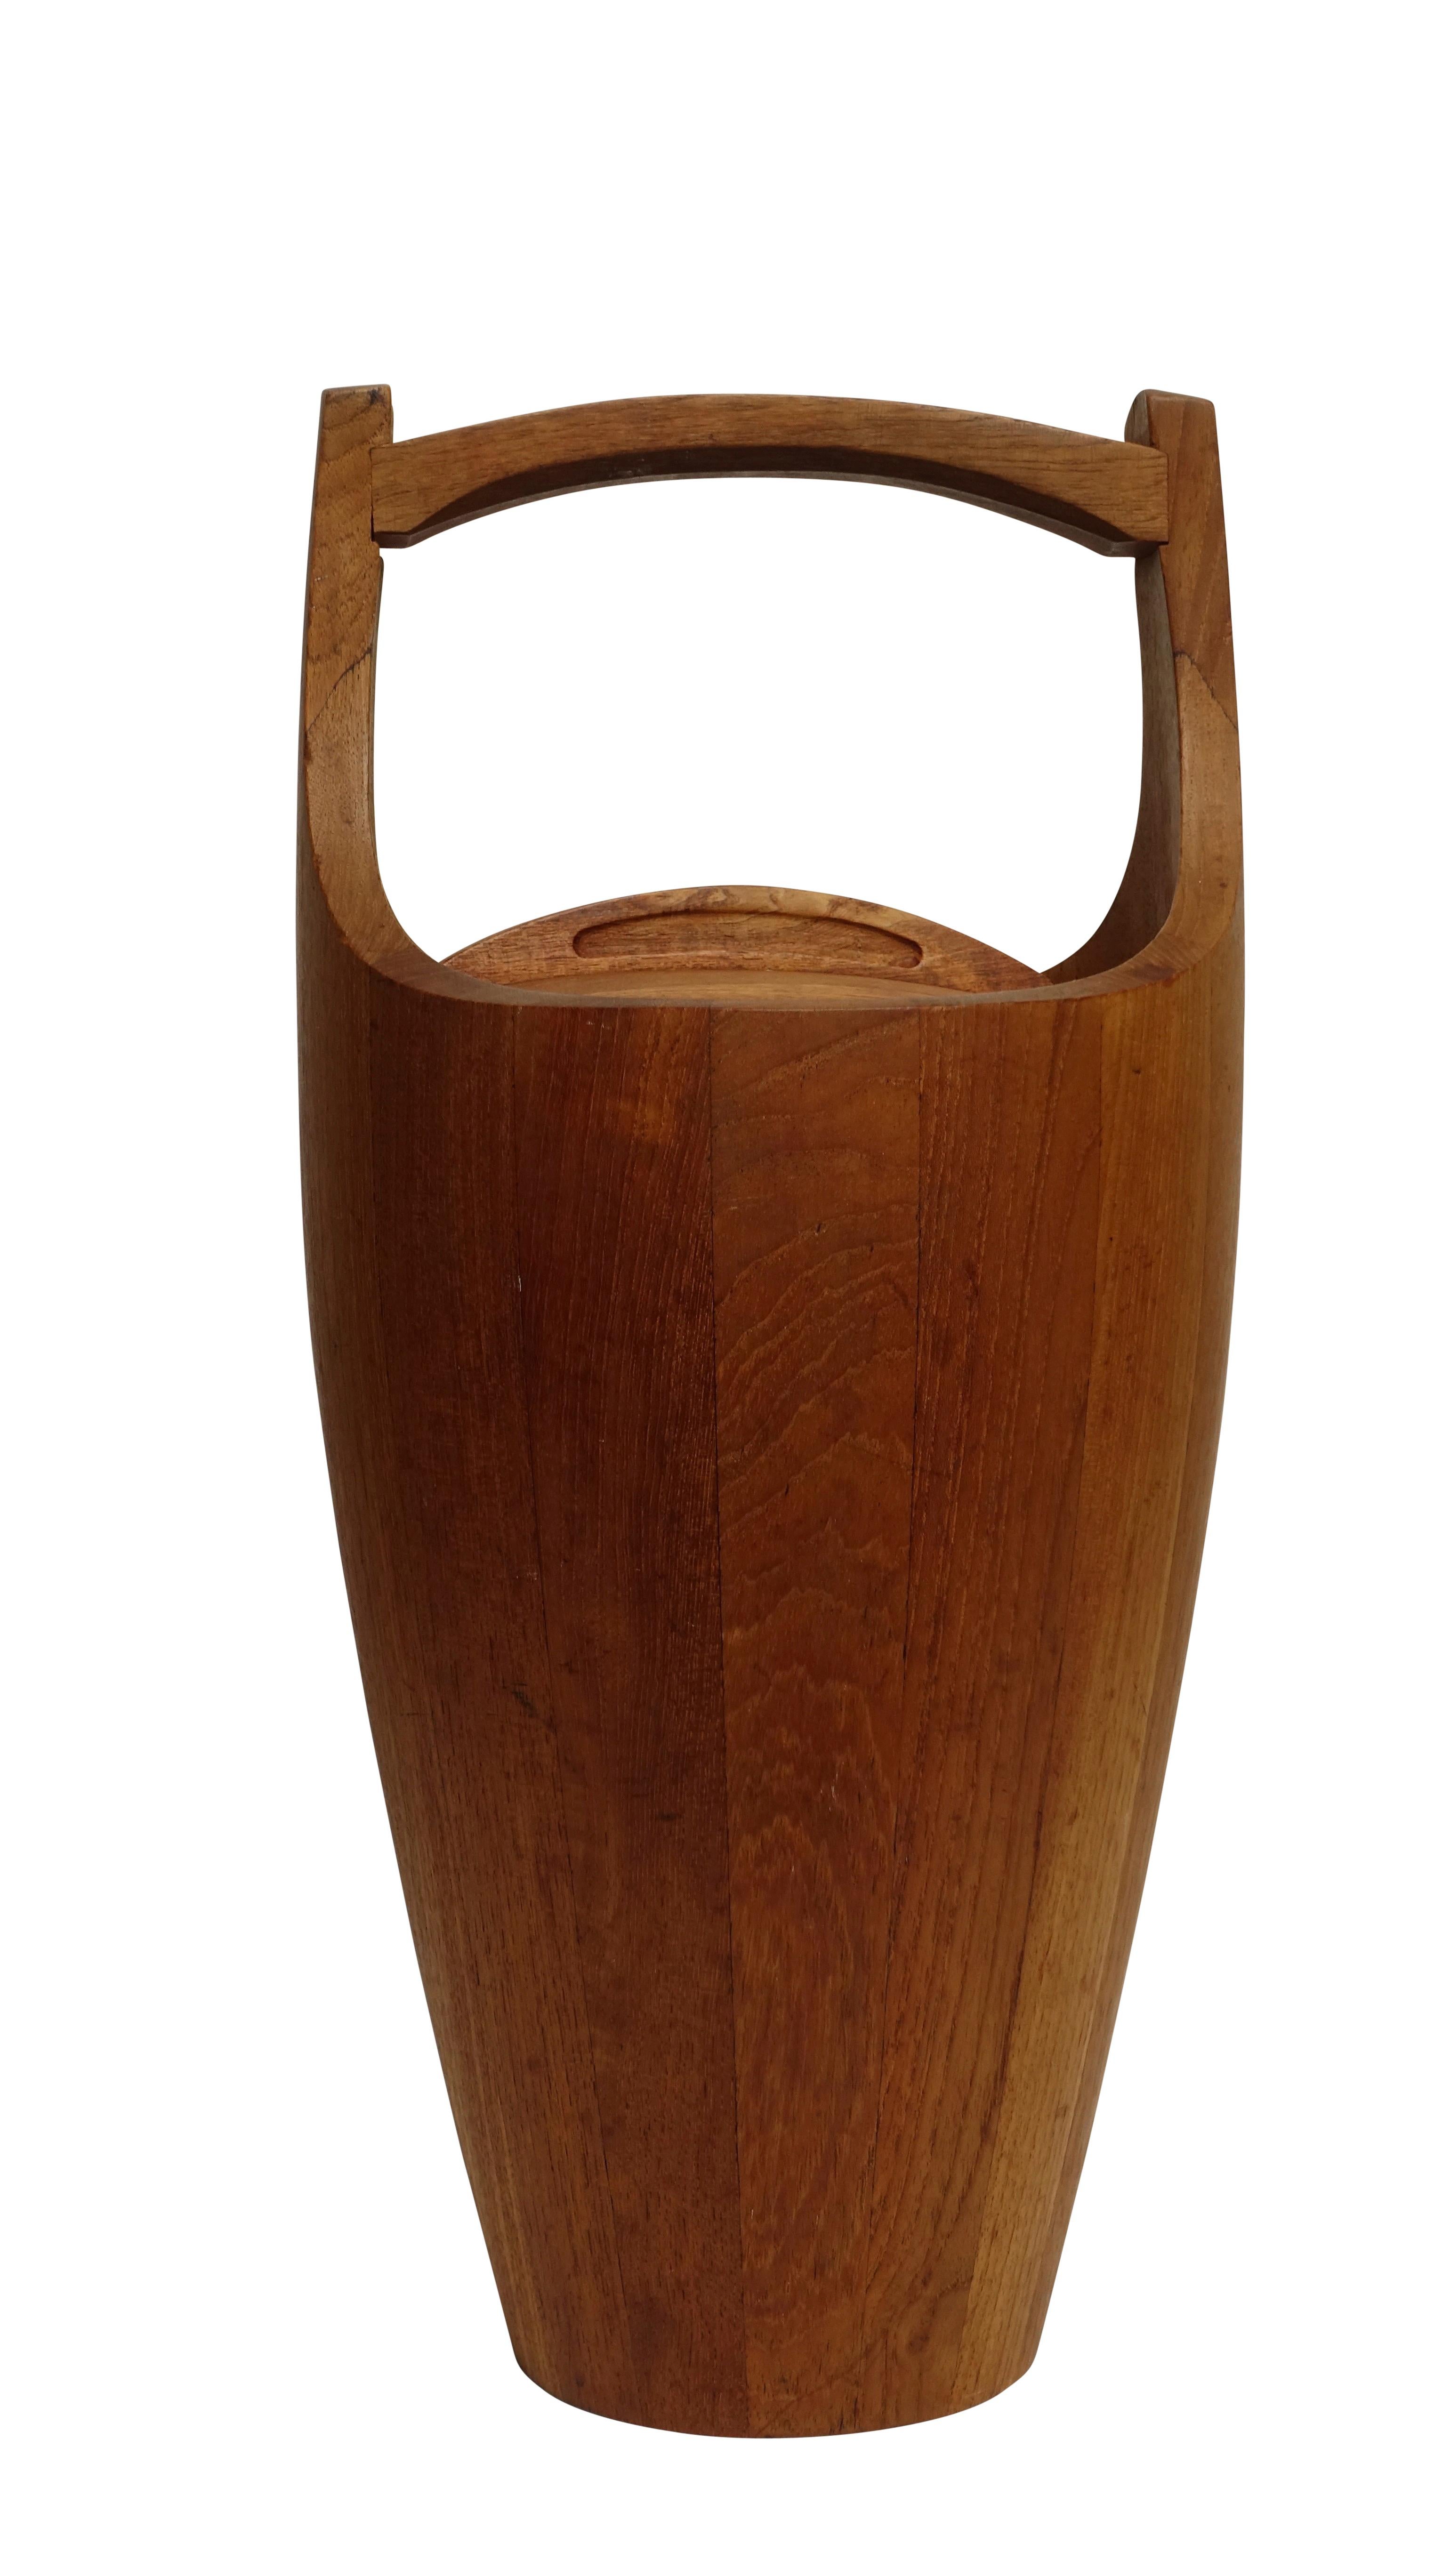 Original teak wood ice bucket by Jens Quistaard for Danmark with lid and liner. Makers mark on the bottom. Denmark, circa 1958.

